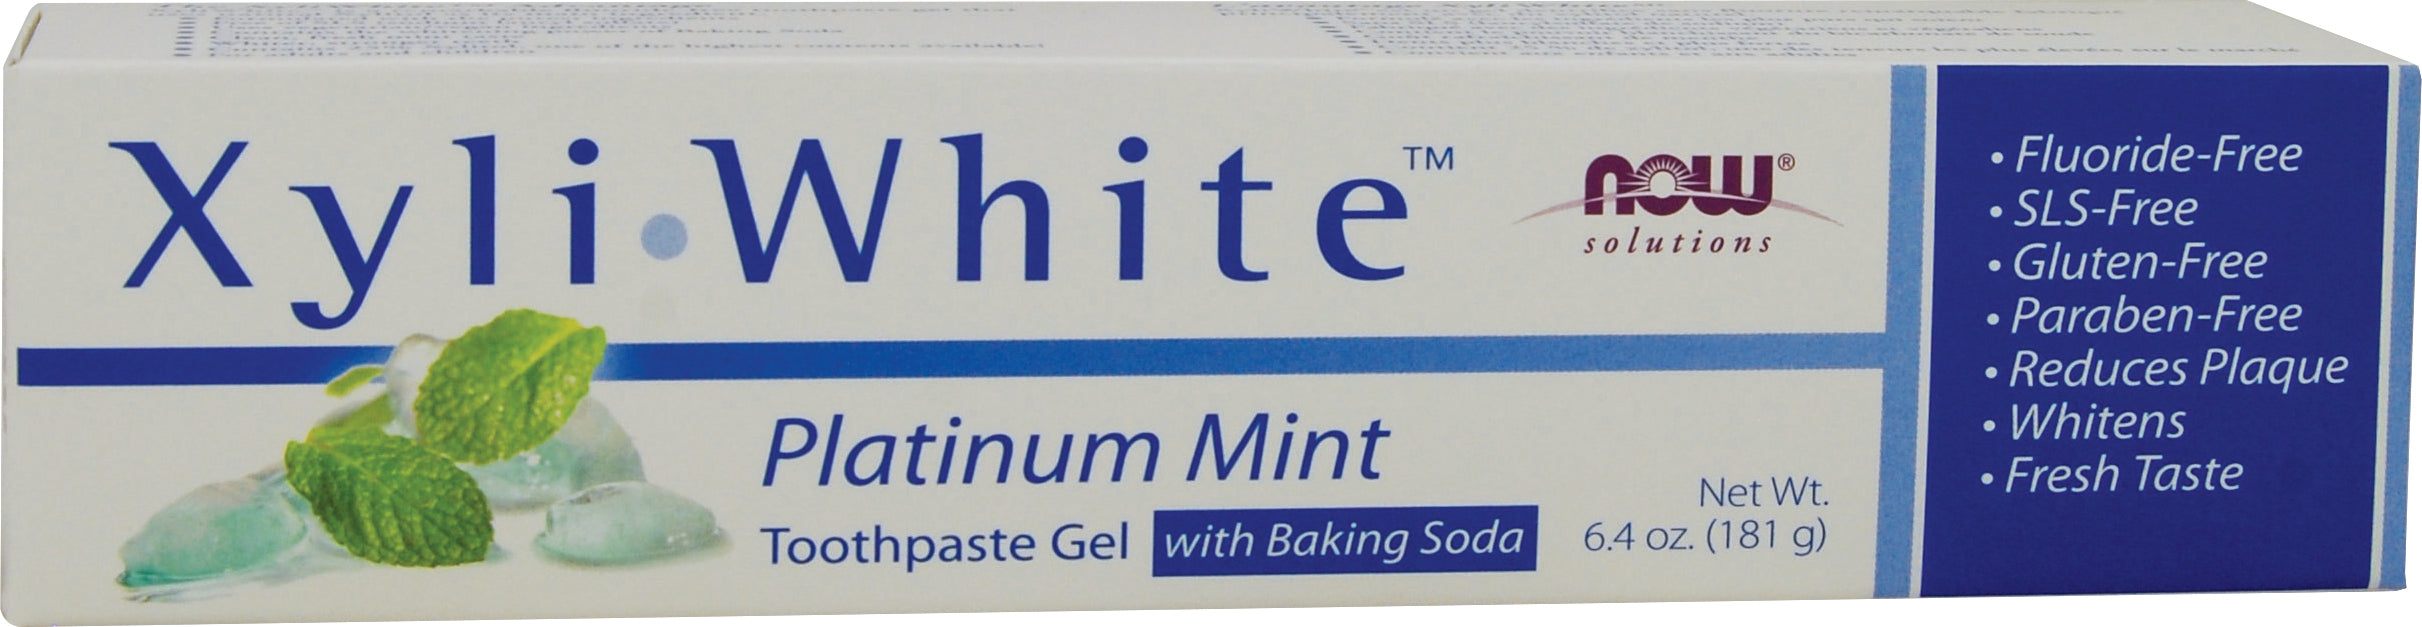 NOW Solutions® XyliWhite Platinum Mint with Baking Soda Toothpaste Gel 181g